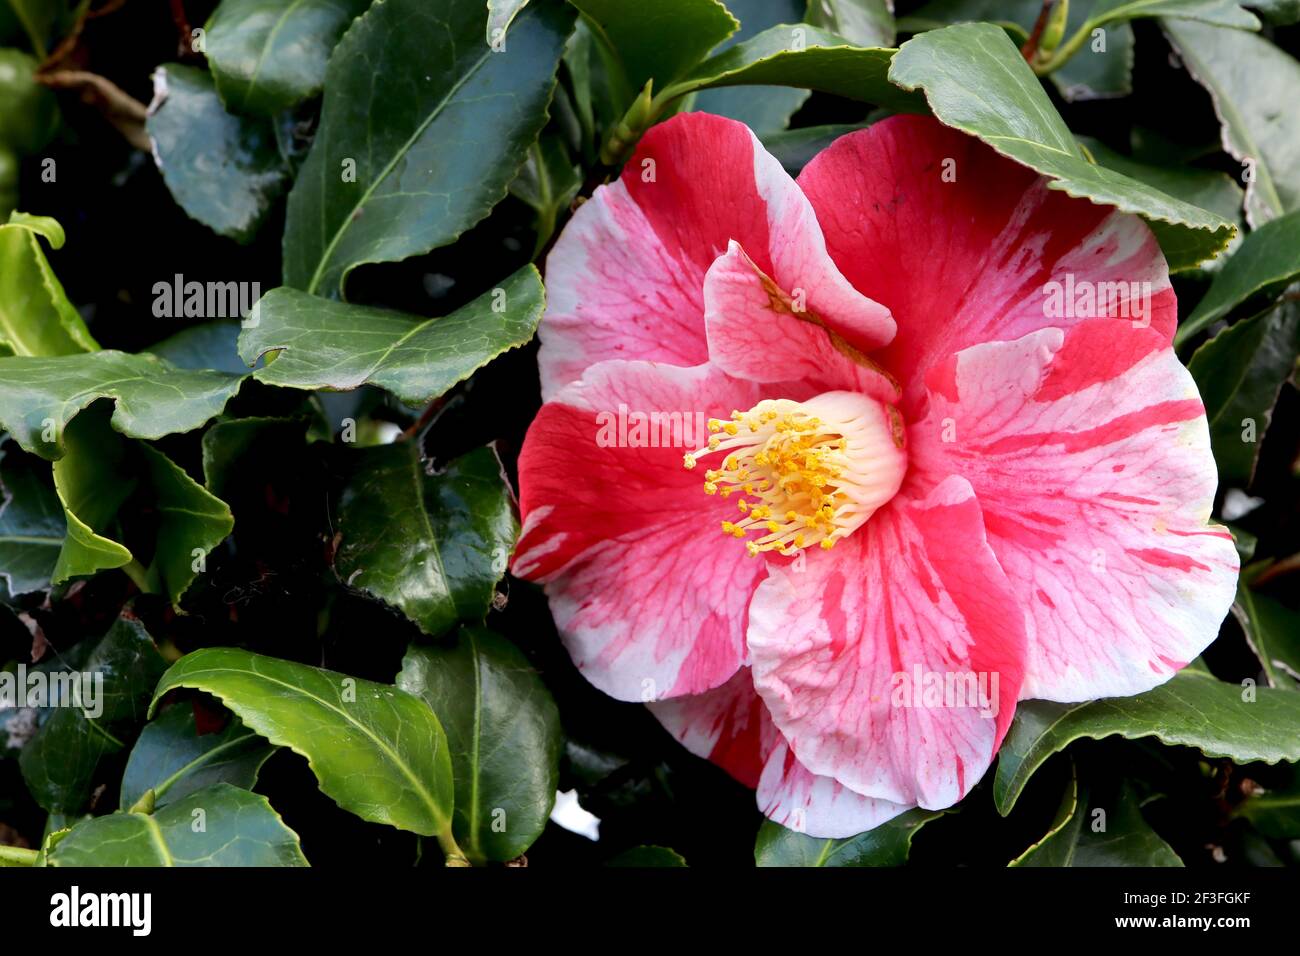 Camellia japonica ‘Tricolor Superba’ Camellia Tricolor Superba – pink flowers with red blotches and white streaks,  March, England, UK Stock Photo